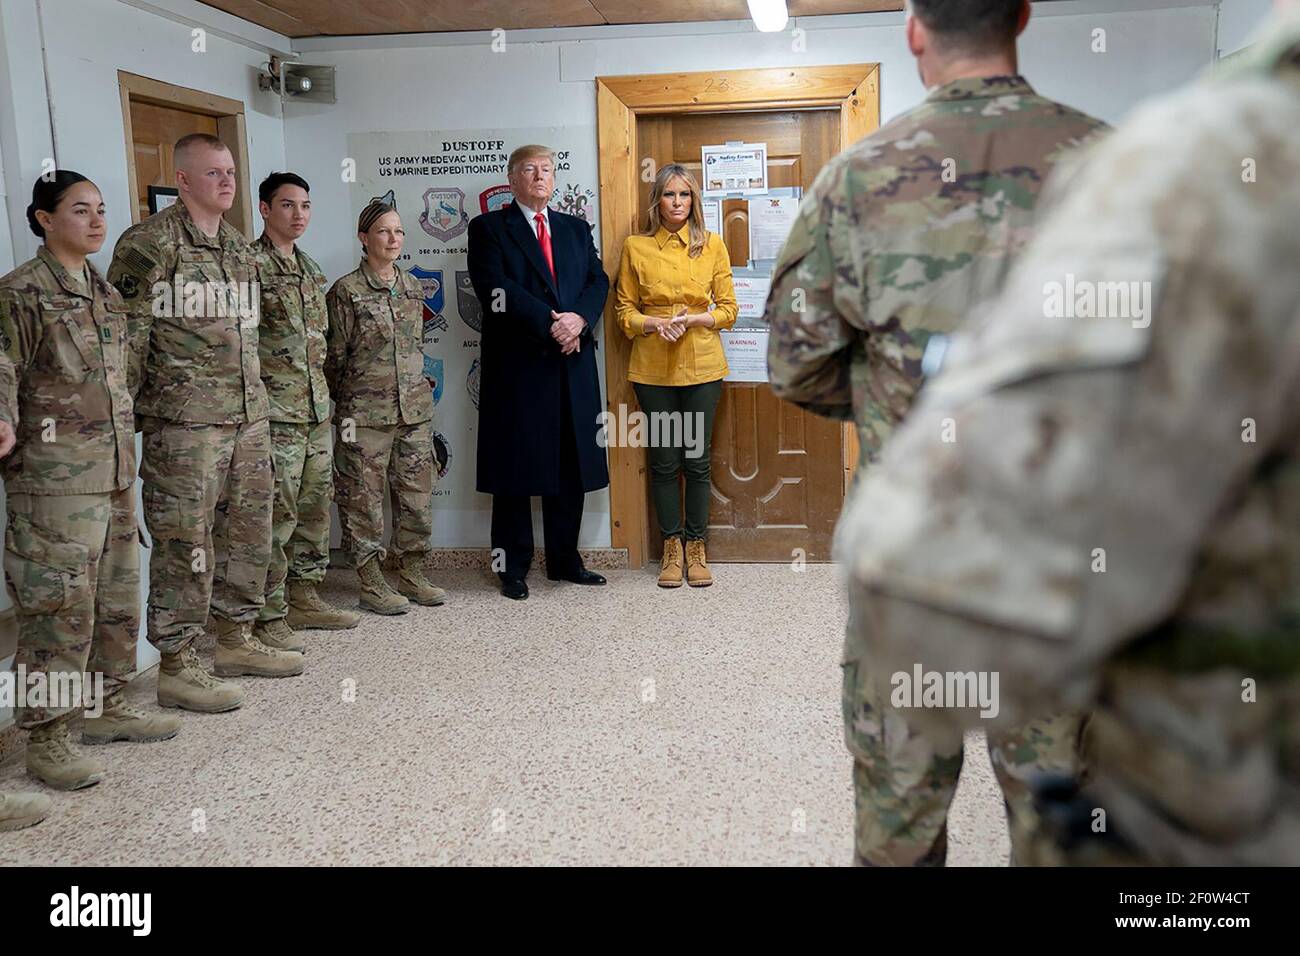 President Donald Trump and First Lady Melania Trump participate in a demonstration by U.S. Pararescue personnel Wednesday December 26 2018 of military equipment and field kits at the Al-Asad Airbase in Iraq. Stock Photo